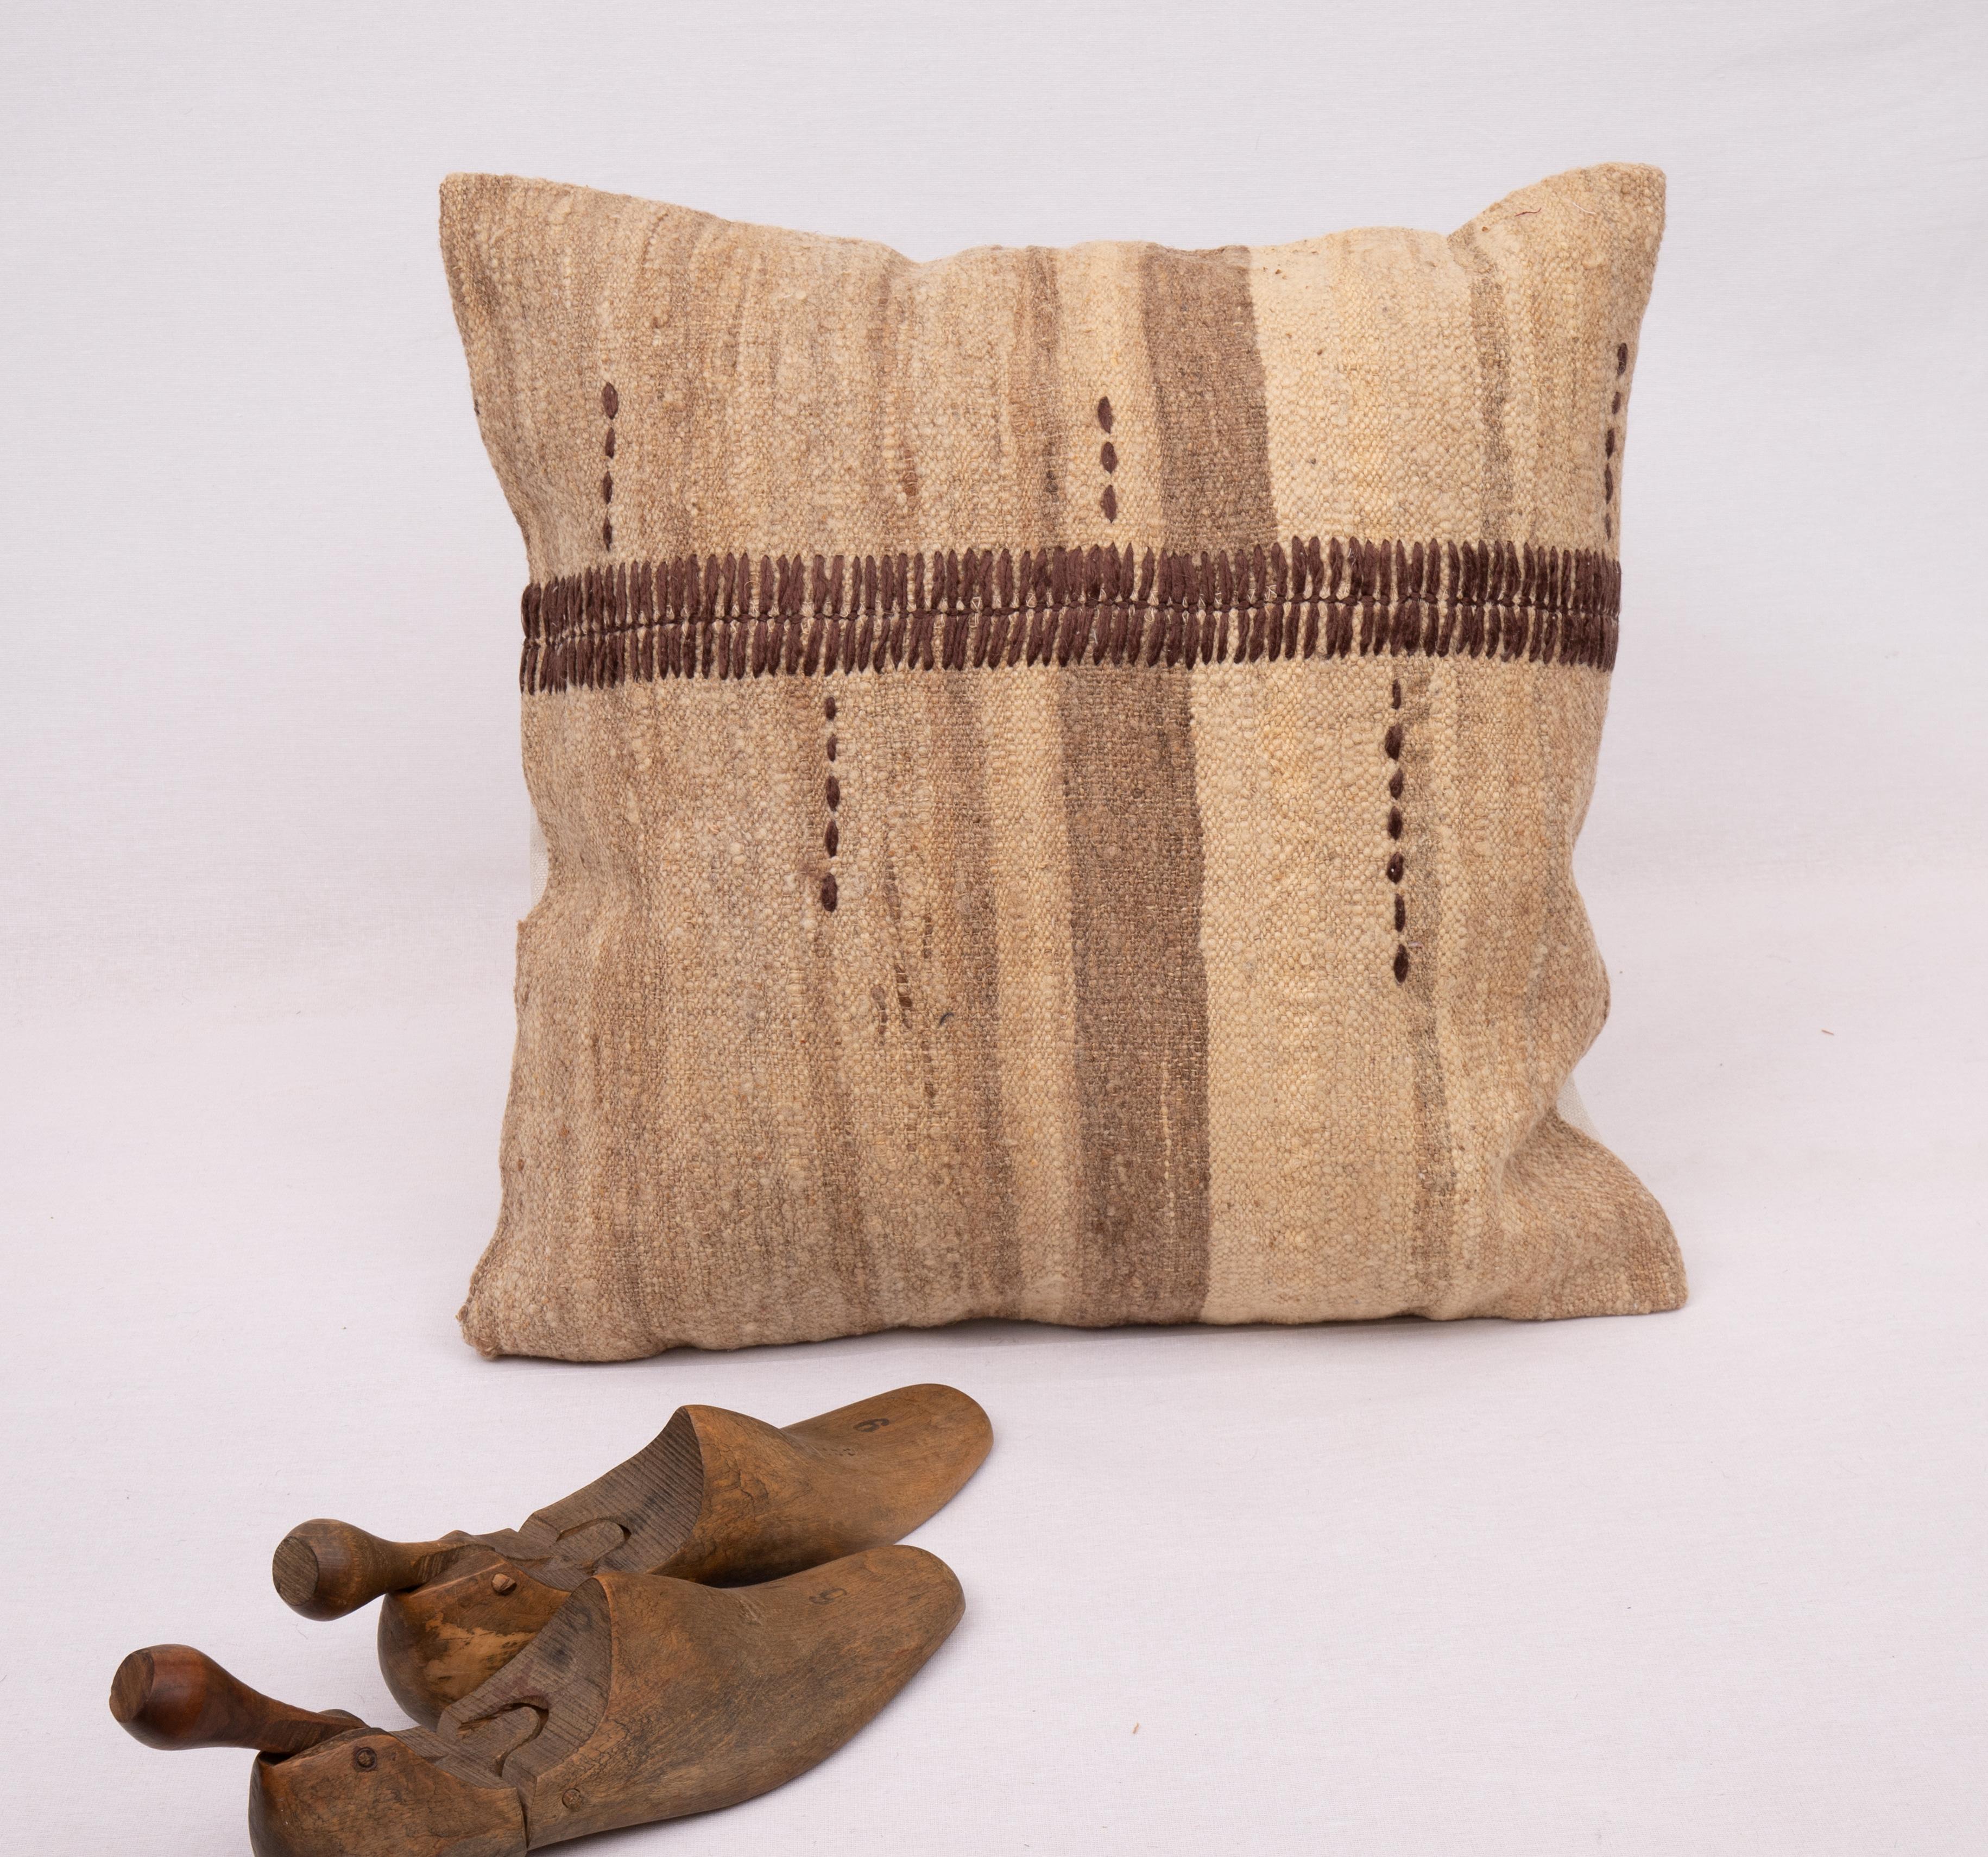 Kilim Rustic Pillow Case Made from a Vintage Un-Dyed Wool Coverlet, Mid-20th C